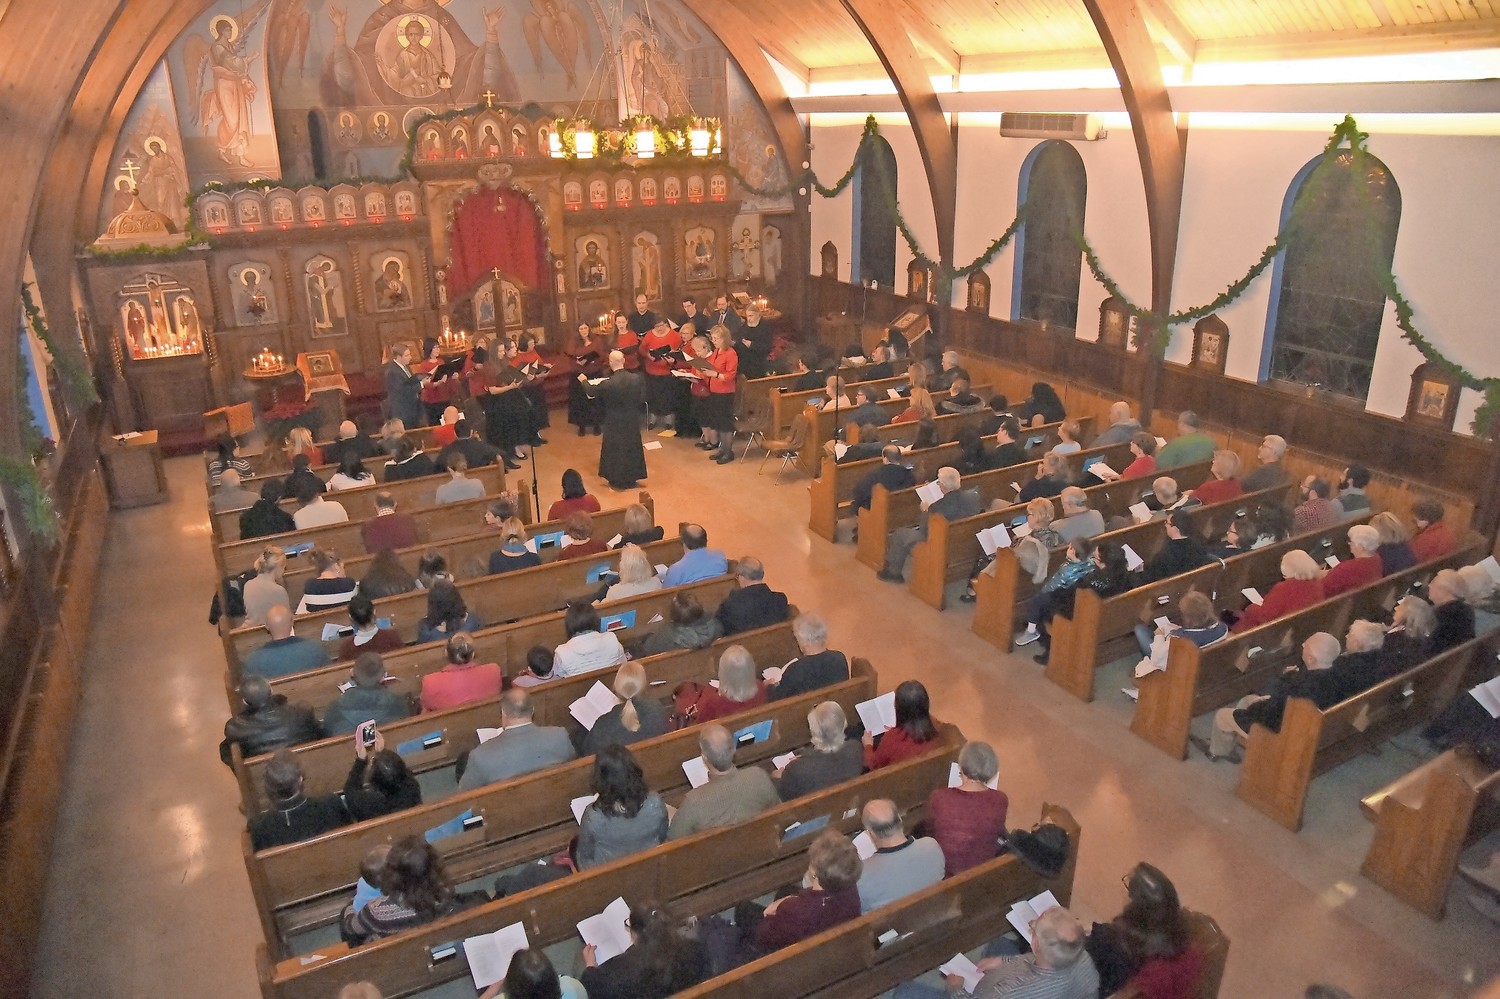 Parishioners of East Meadow’s Holy Trinity Orthodox Church listened to the church choir during its annual Christmas concert on Dec. 2.